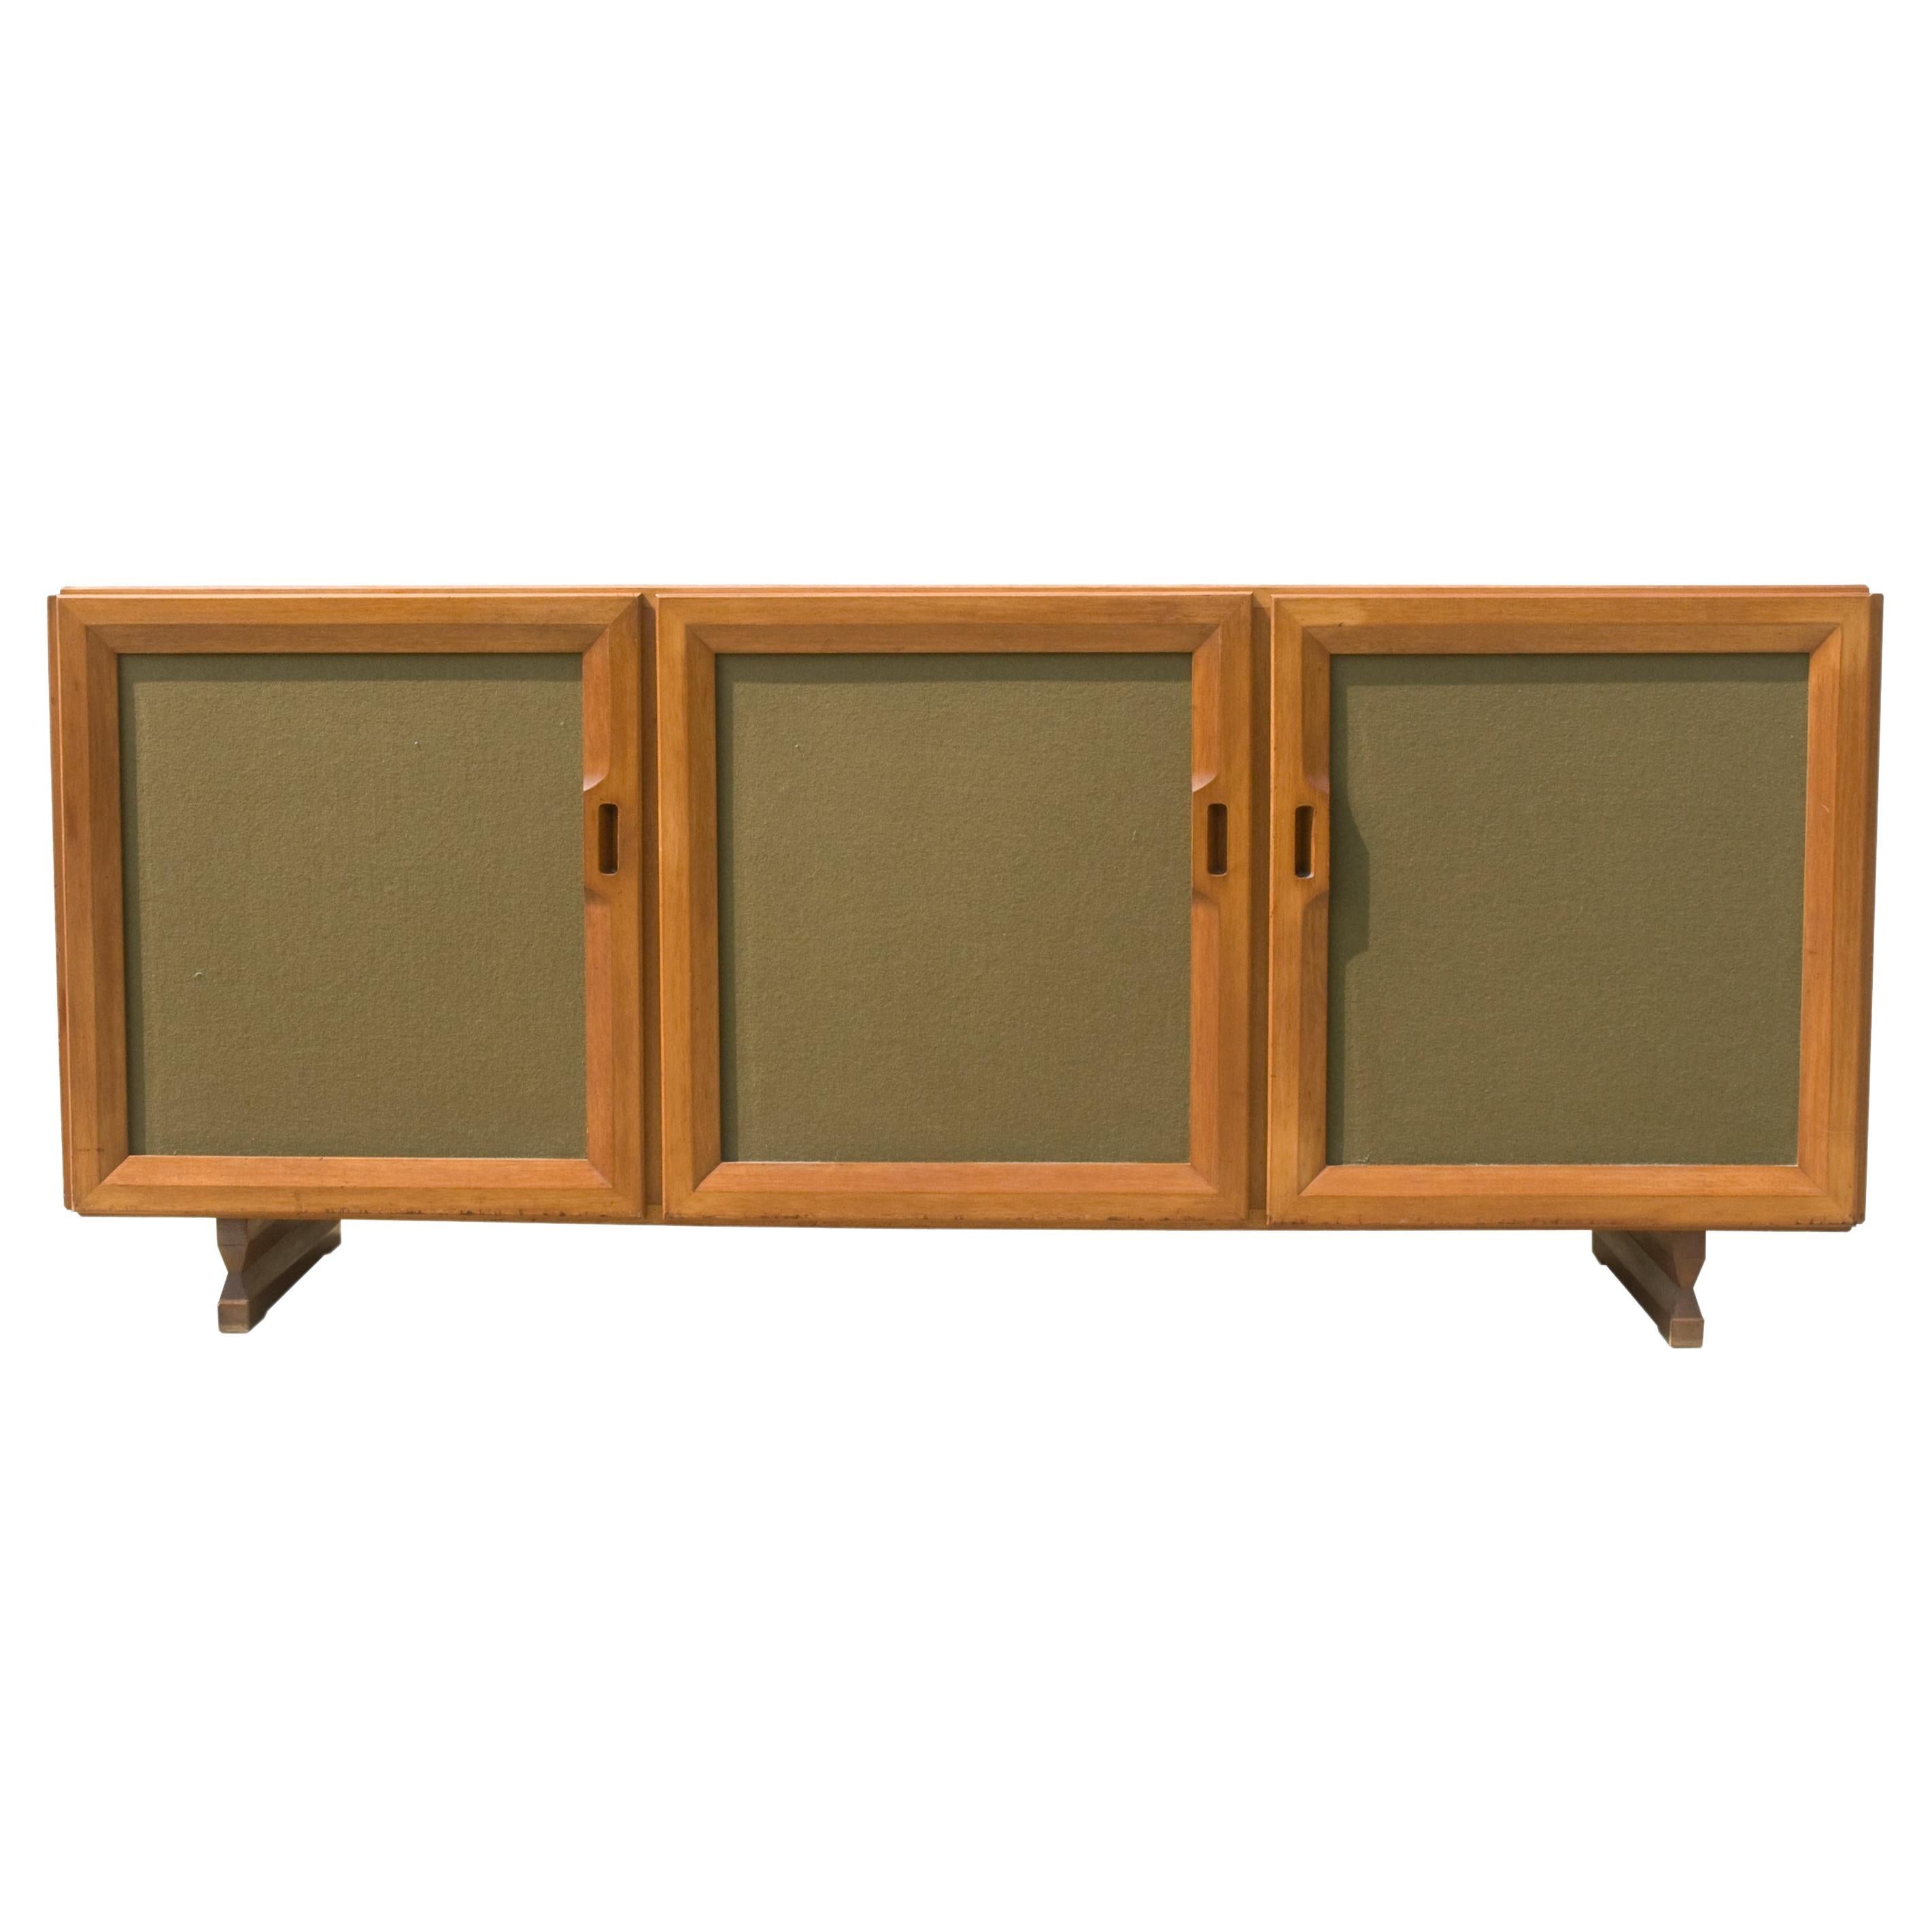 Walnut & olive green fabric 1950s MB 15 Sideboard by Albini & Helg for Poggi For Sale